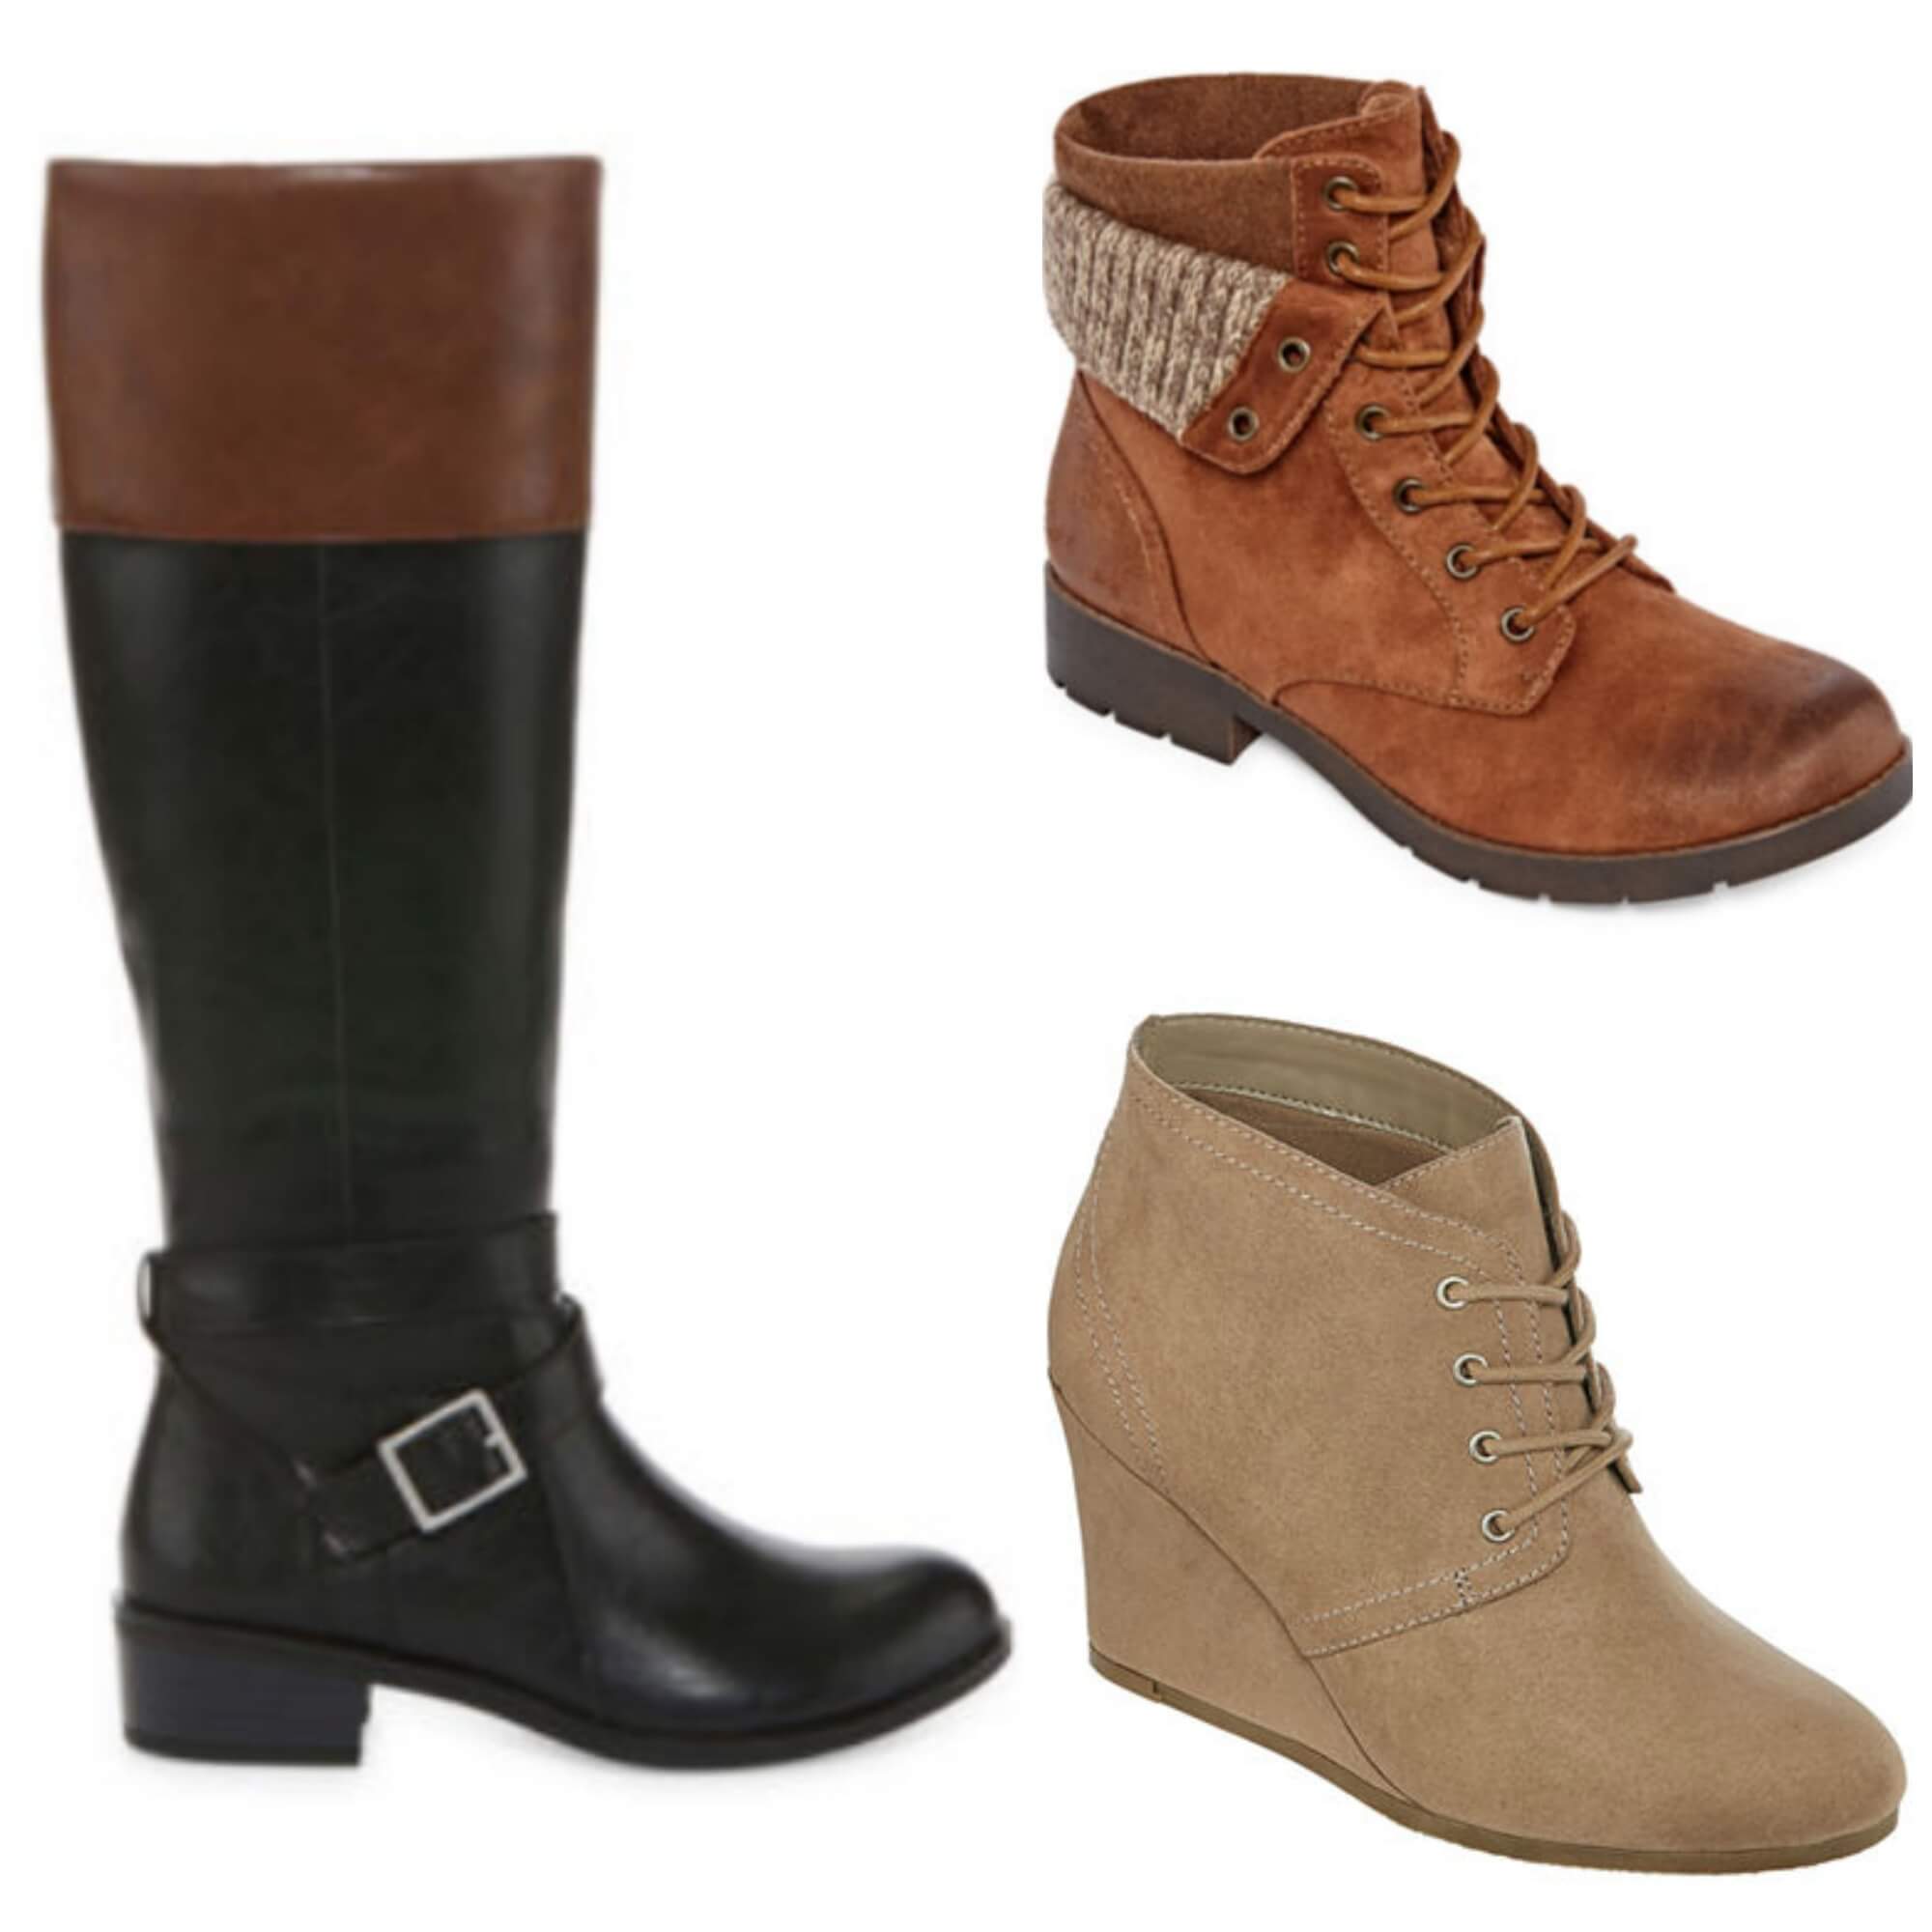 Buy 1 Pair of Boots Get 2 FREE at JCPenney + Free Shipping Living